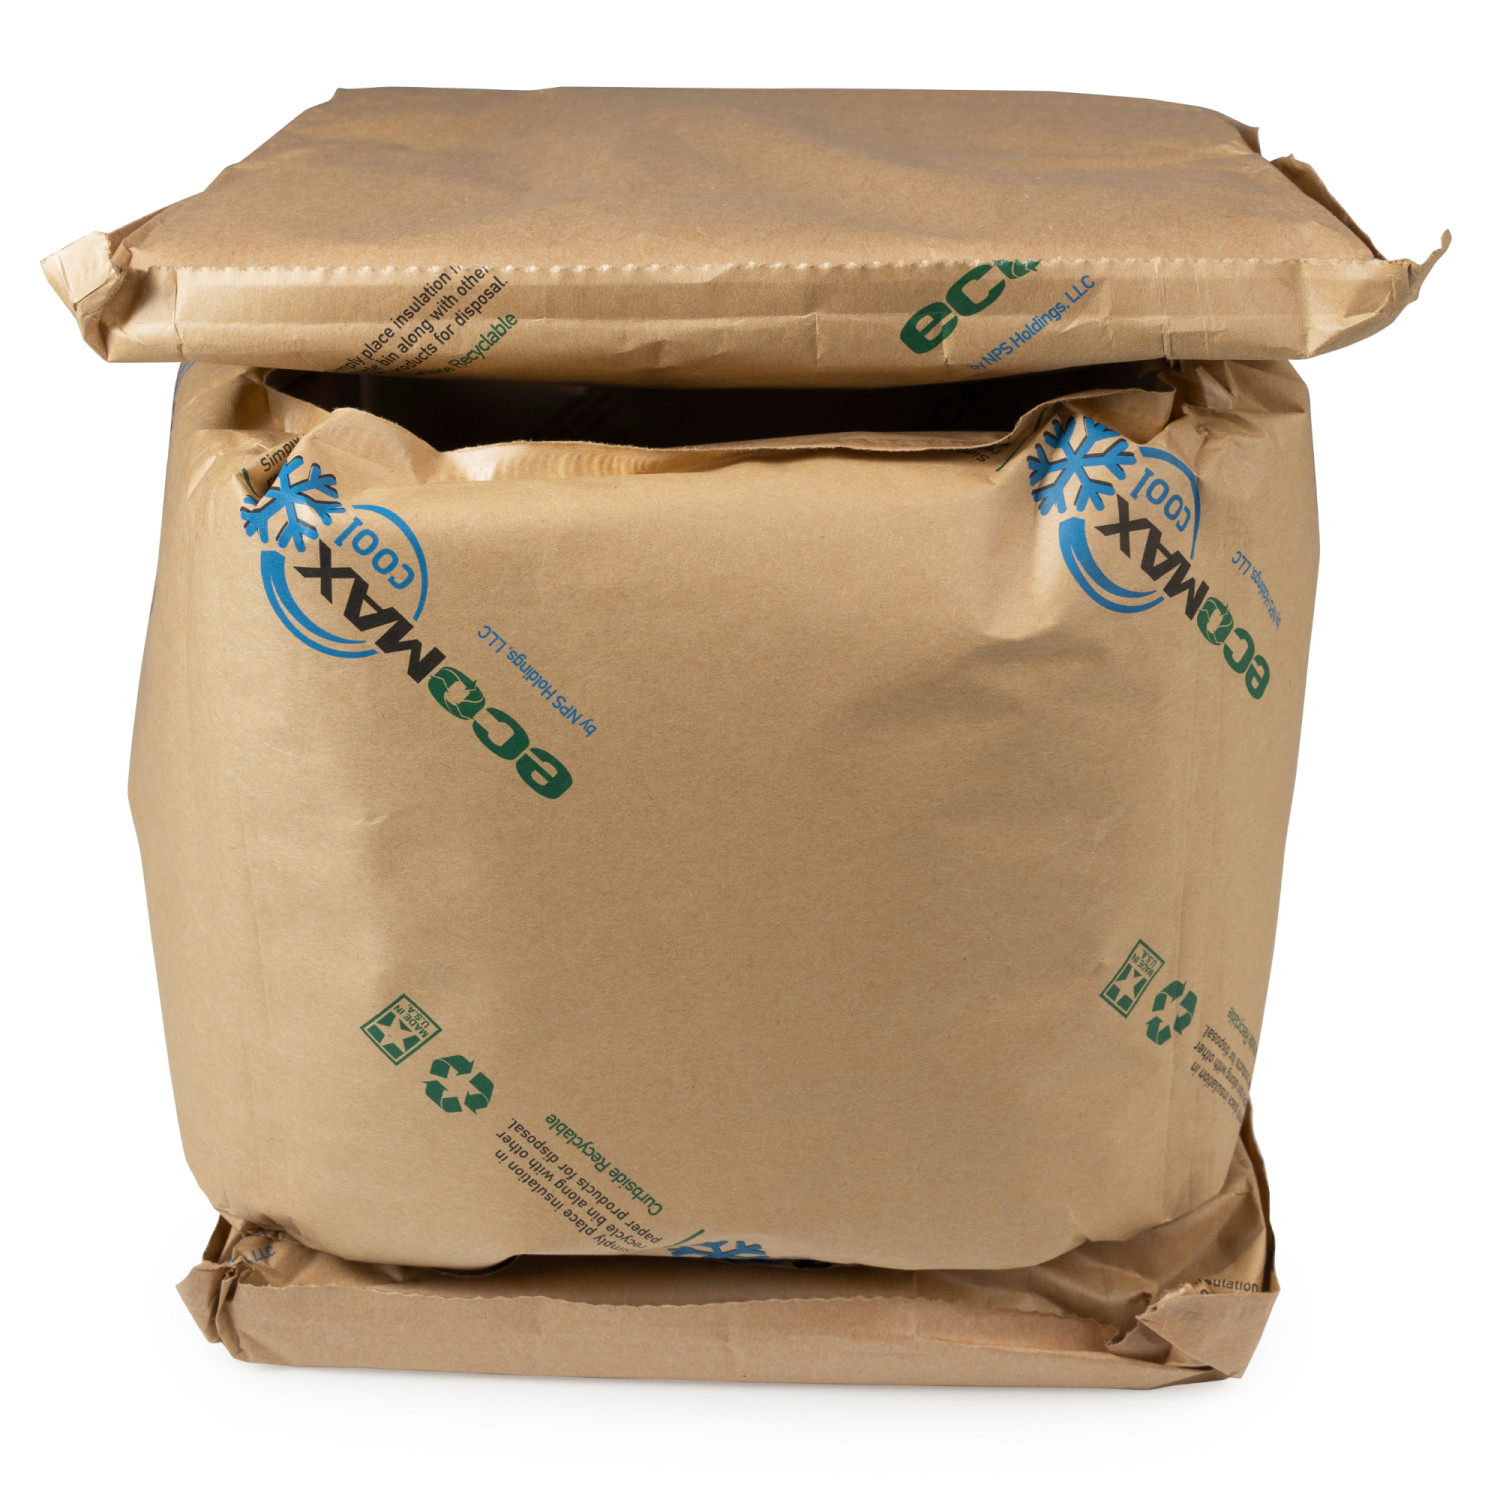 14 x 14 x 14 Insulated Shipping Box, 5.8-Gallon Capacity, Includes  EcoMax™ Thermal-Paper Liners buy in stock in U.S. in IDL Packaging